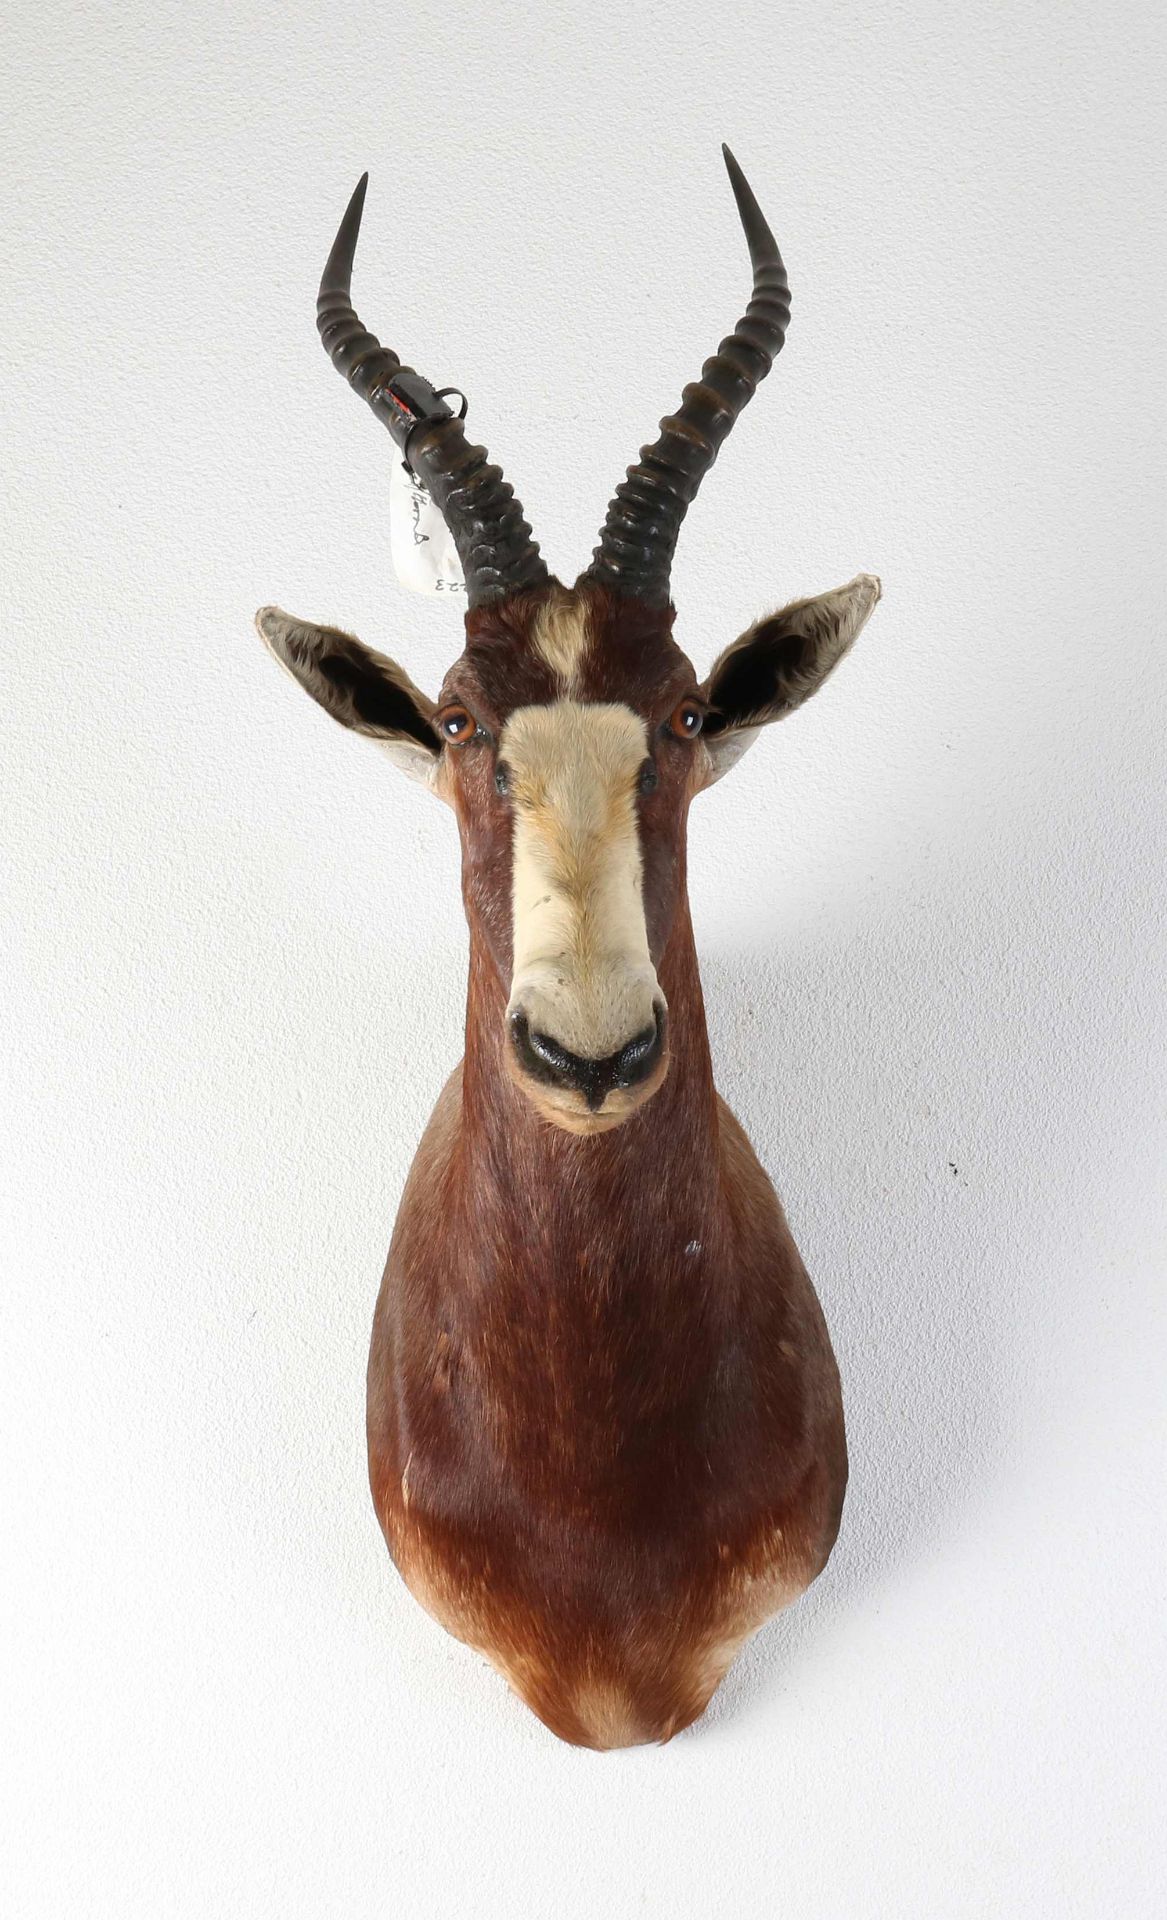 South African springbok bust